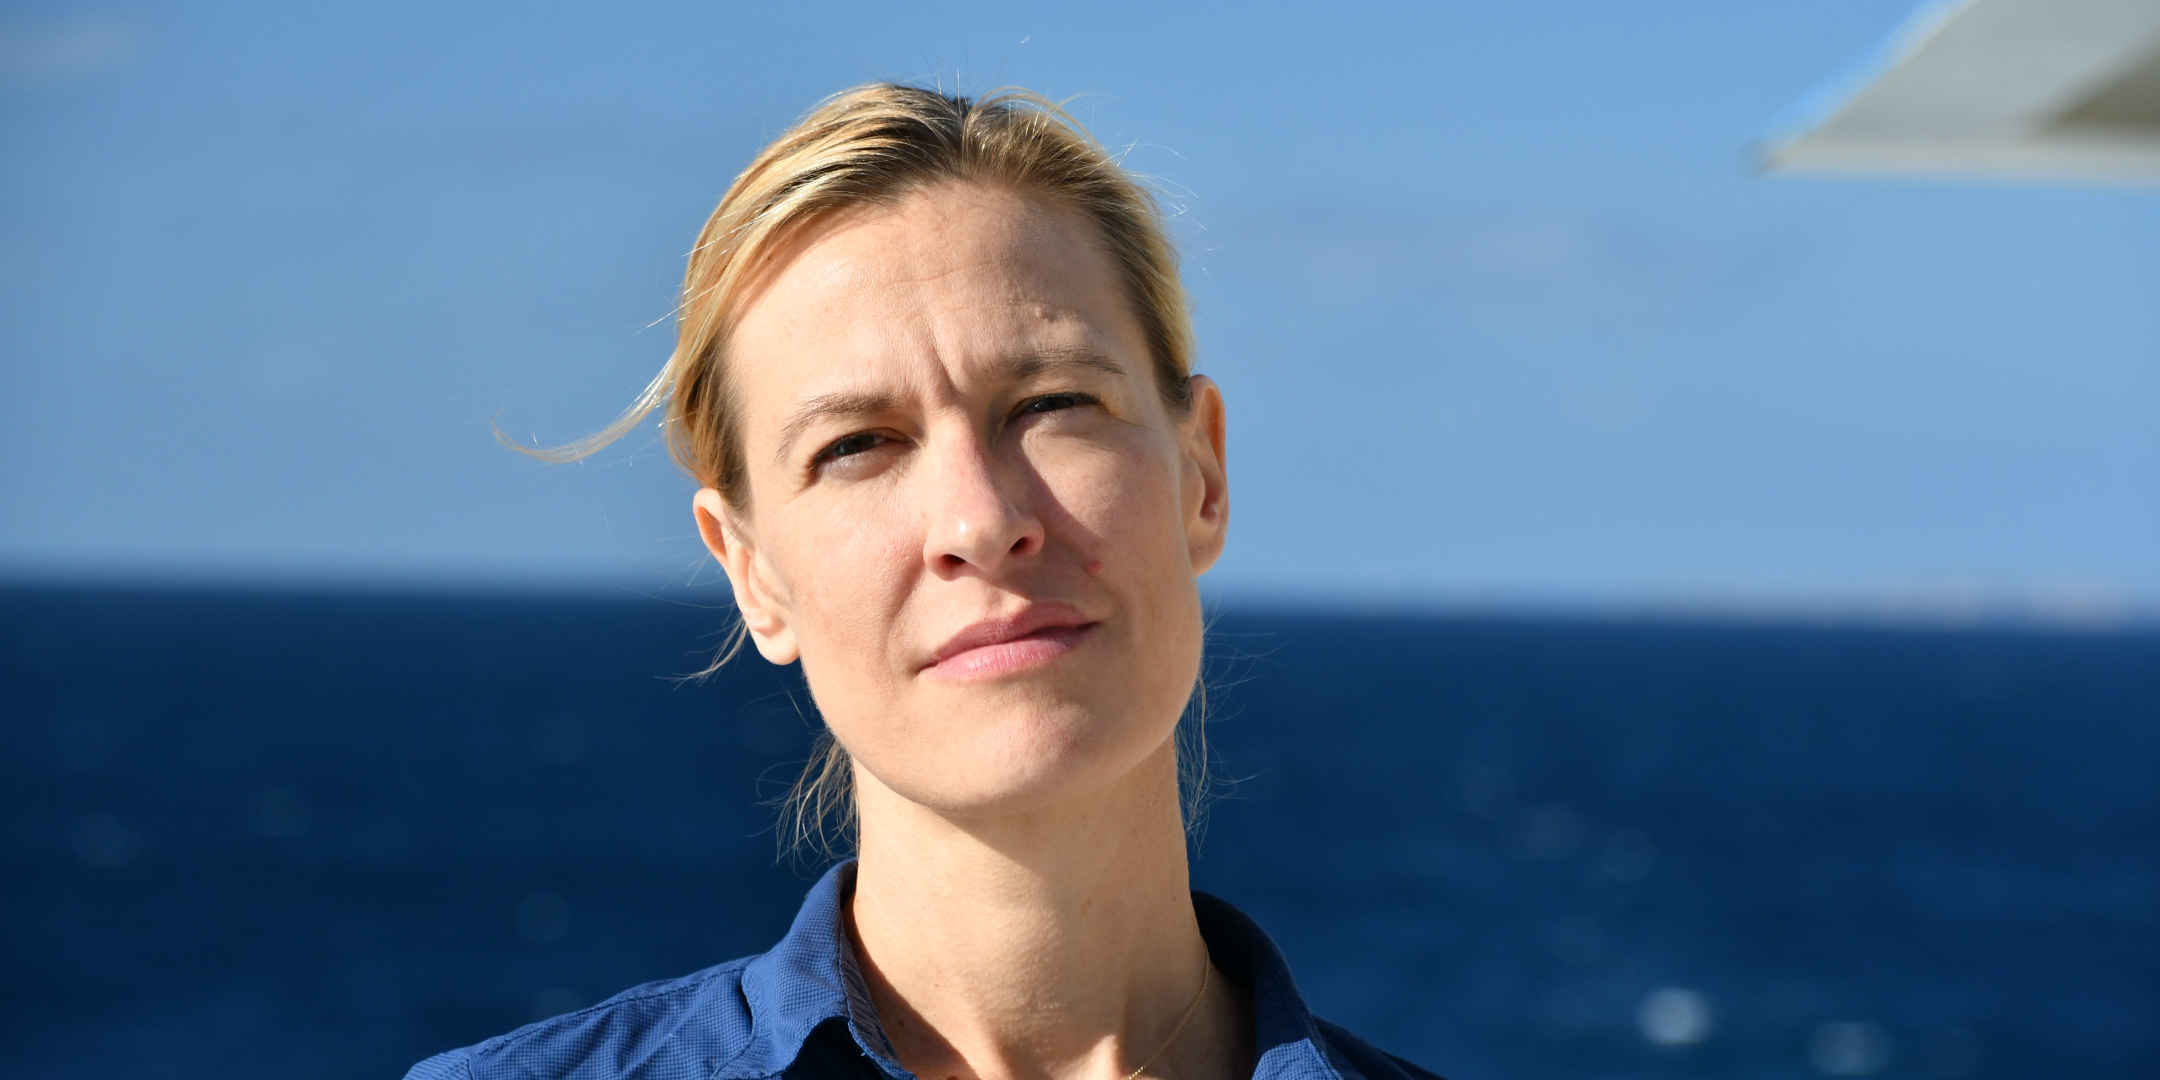 Curator of Ocean Science and Technology at the Australian National Maritime Museum – Emily Jateff